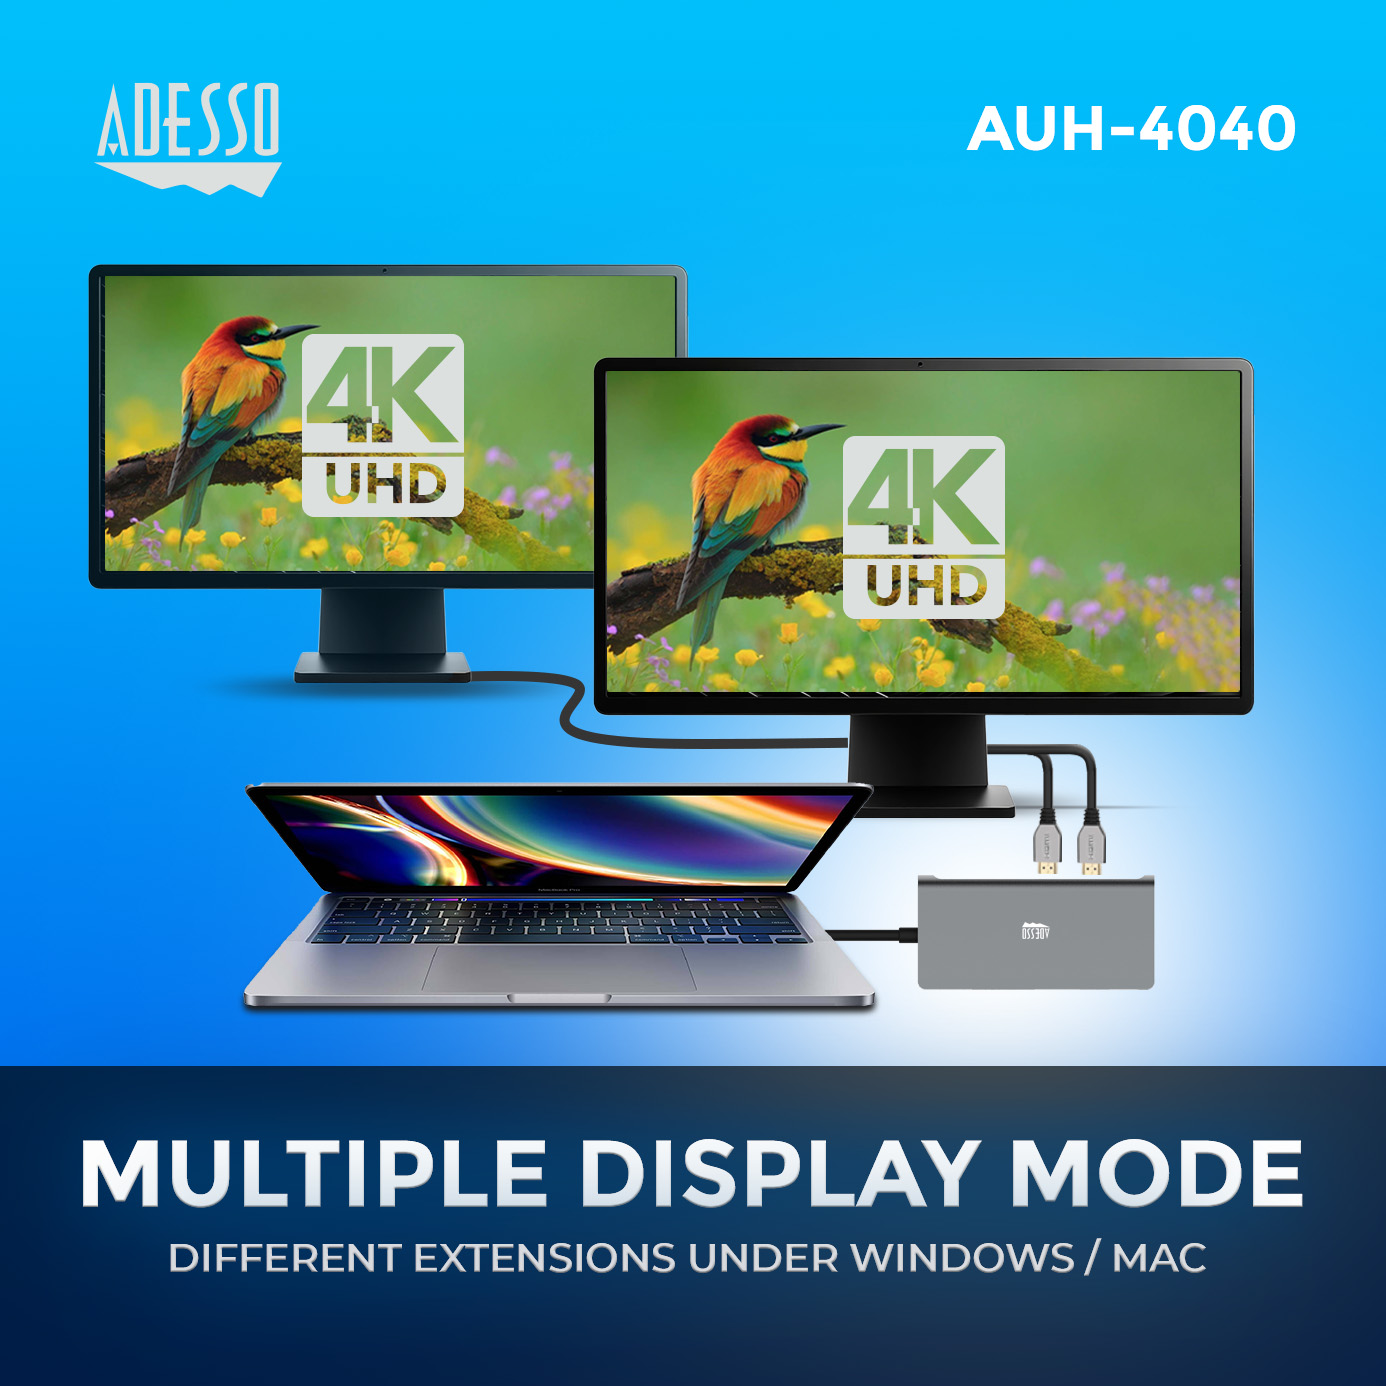 AUH-4040_A+ BAnner -Multiple Display